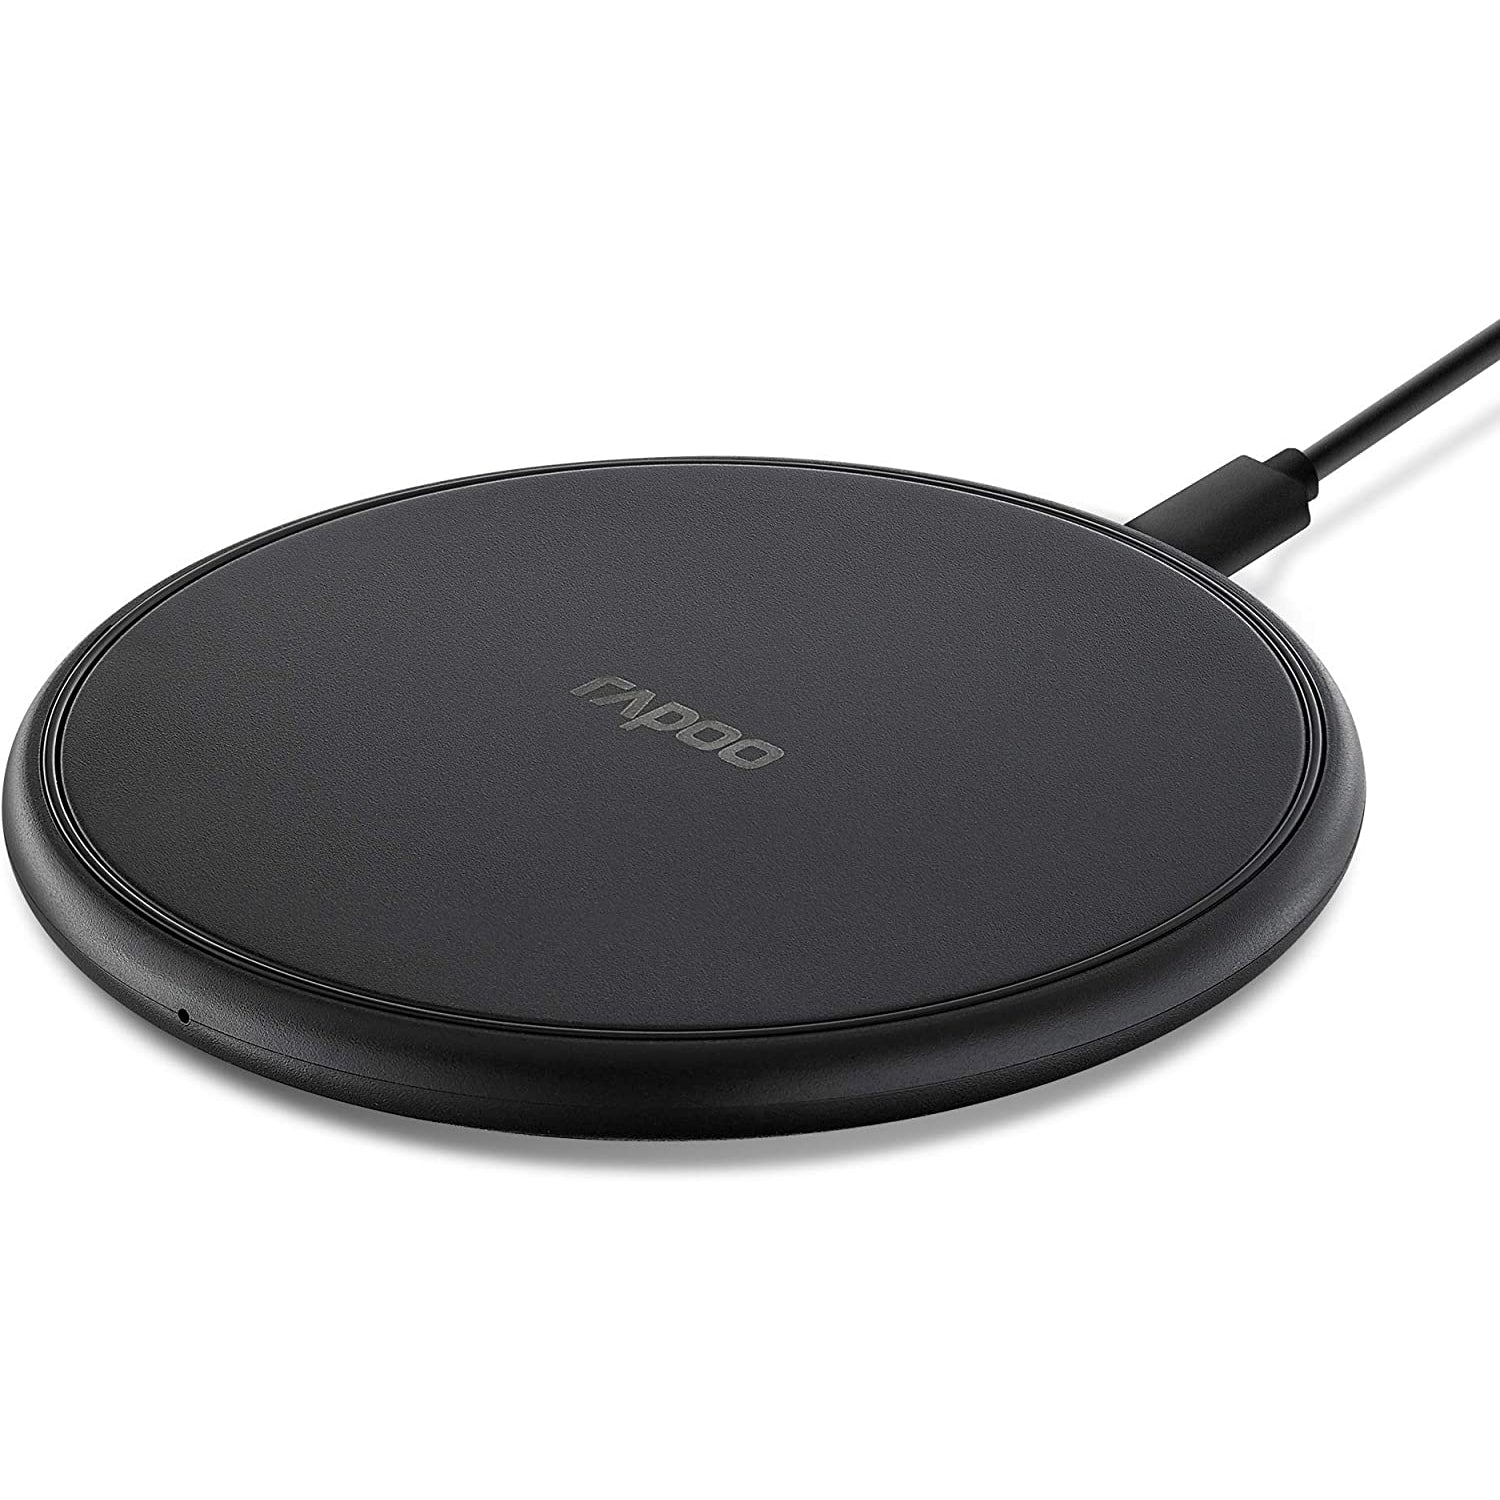 Rapoo XC100 Wireless Charging Base - Refurbished Excellent